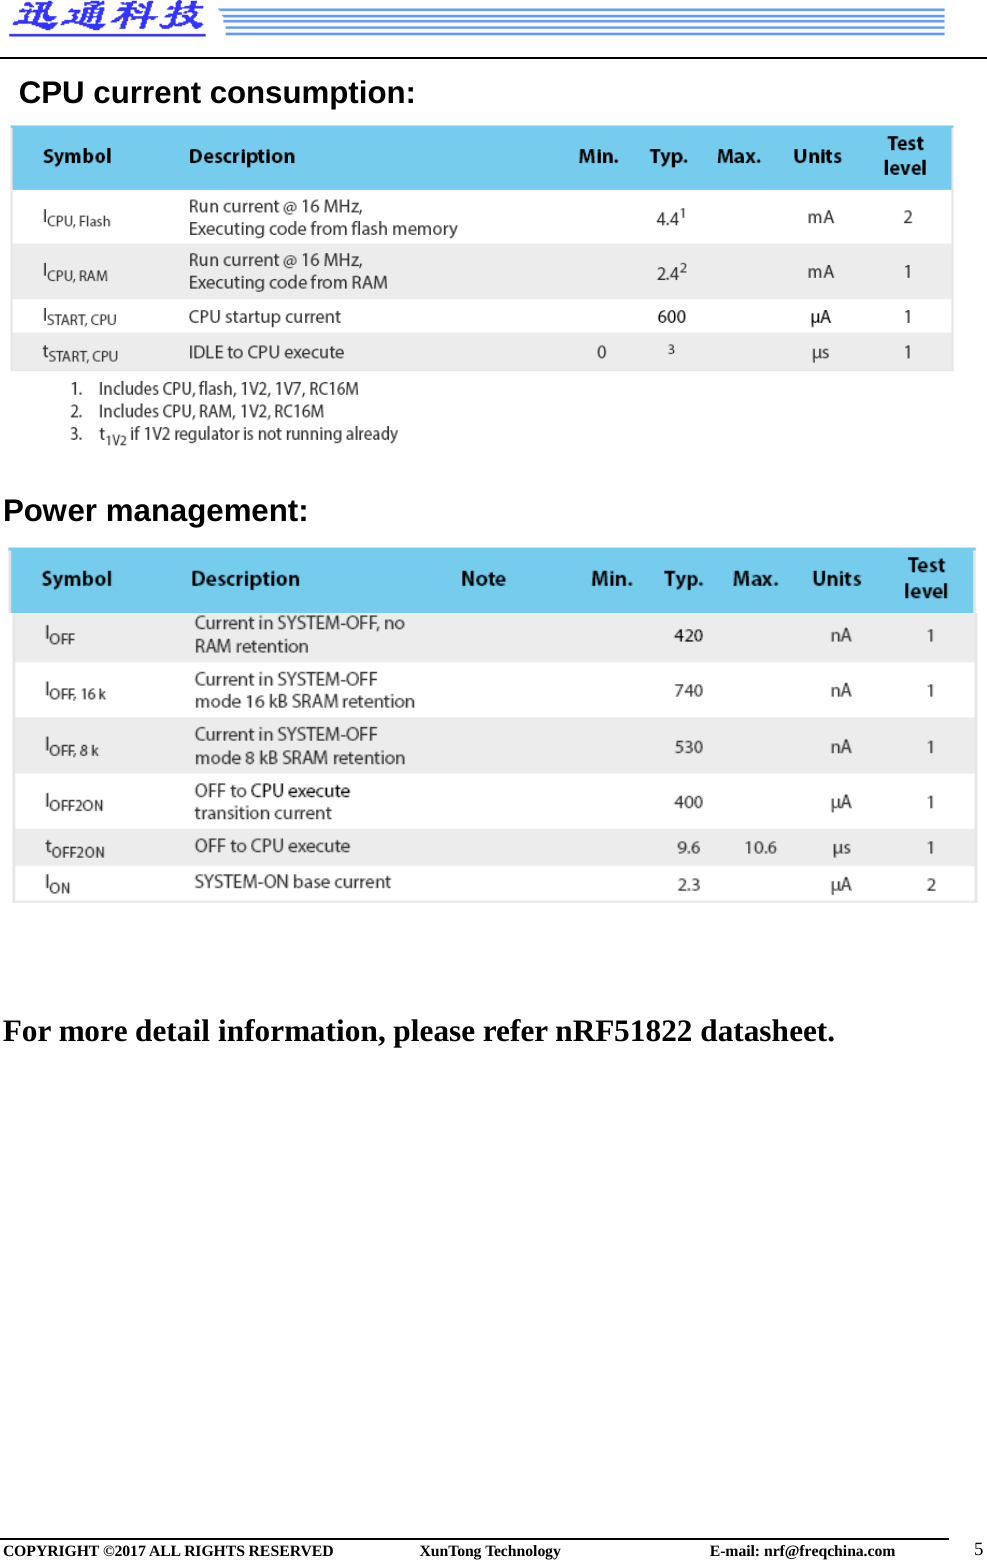   CPU current consumption:   Power management:        For more detail information, please refer nRF51822 datasheet.        COPYRIGHT ©2017 ALL RIGHTS RESERVED            XunTong Technology                   E-mail: nrf@freqchina.com  5 